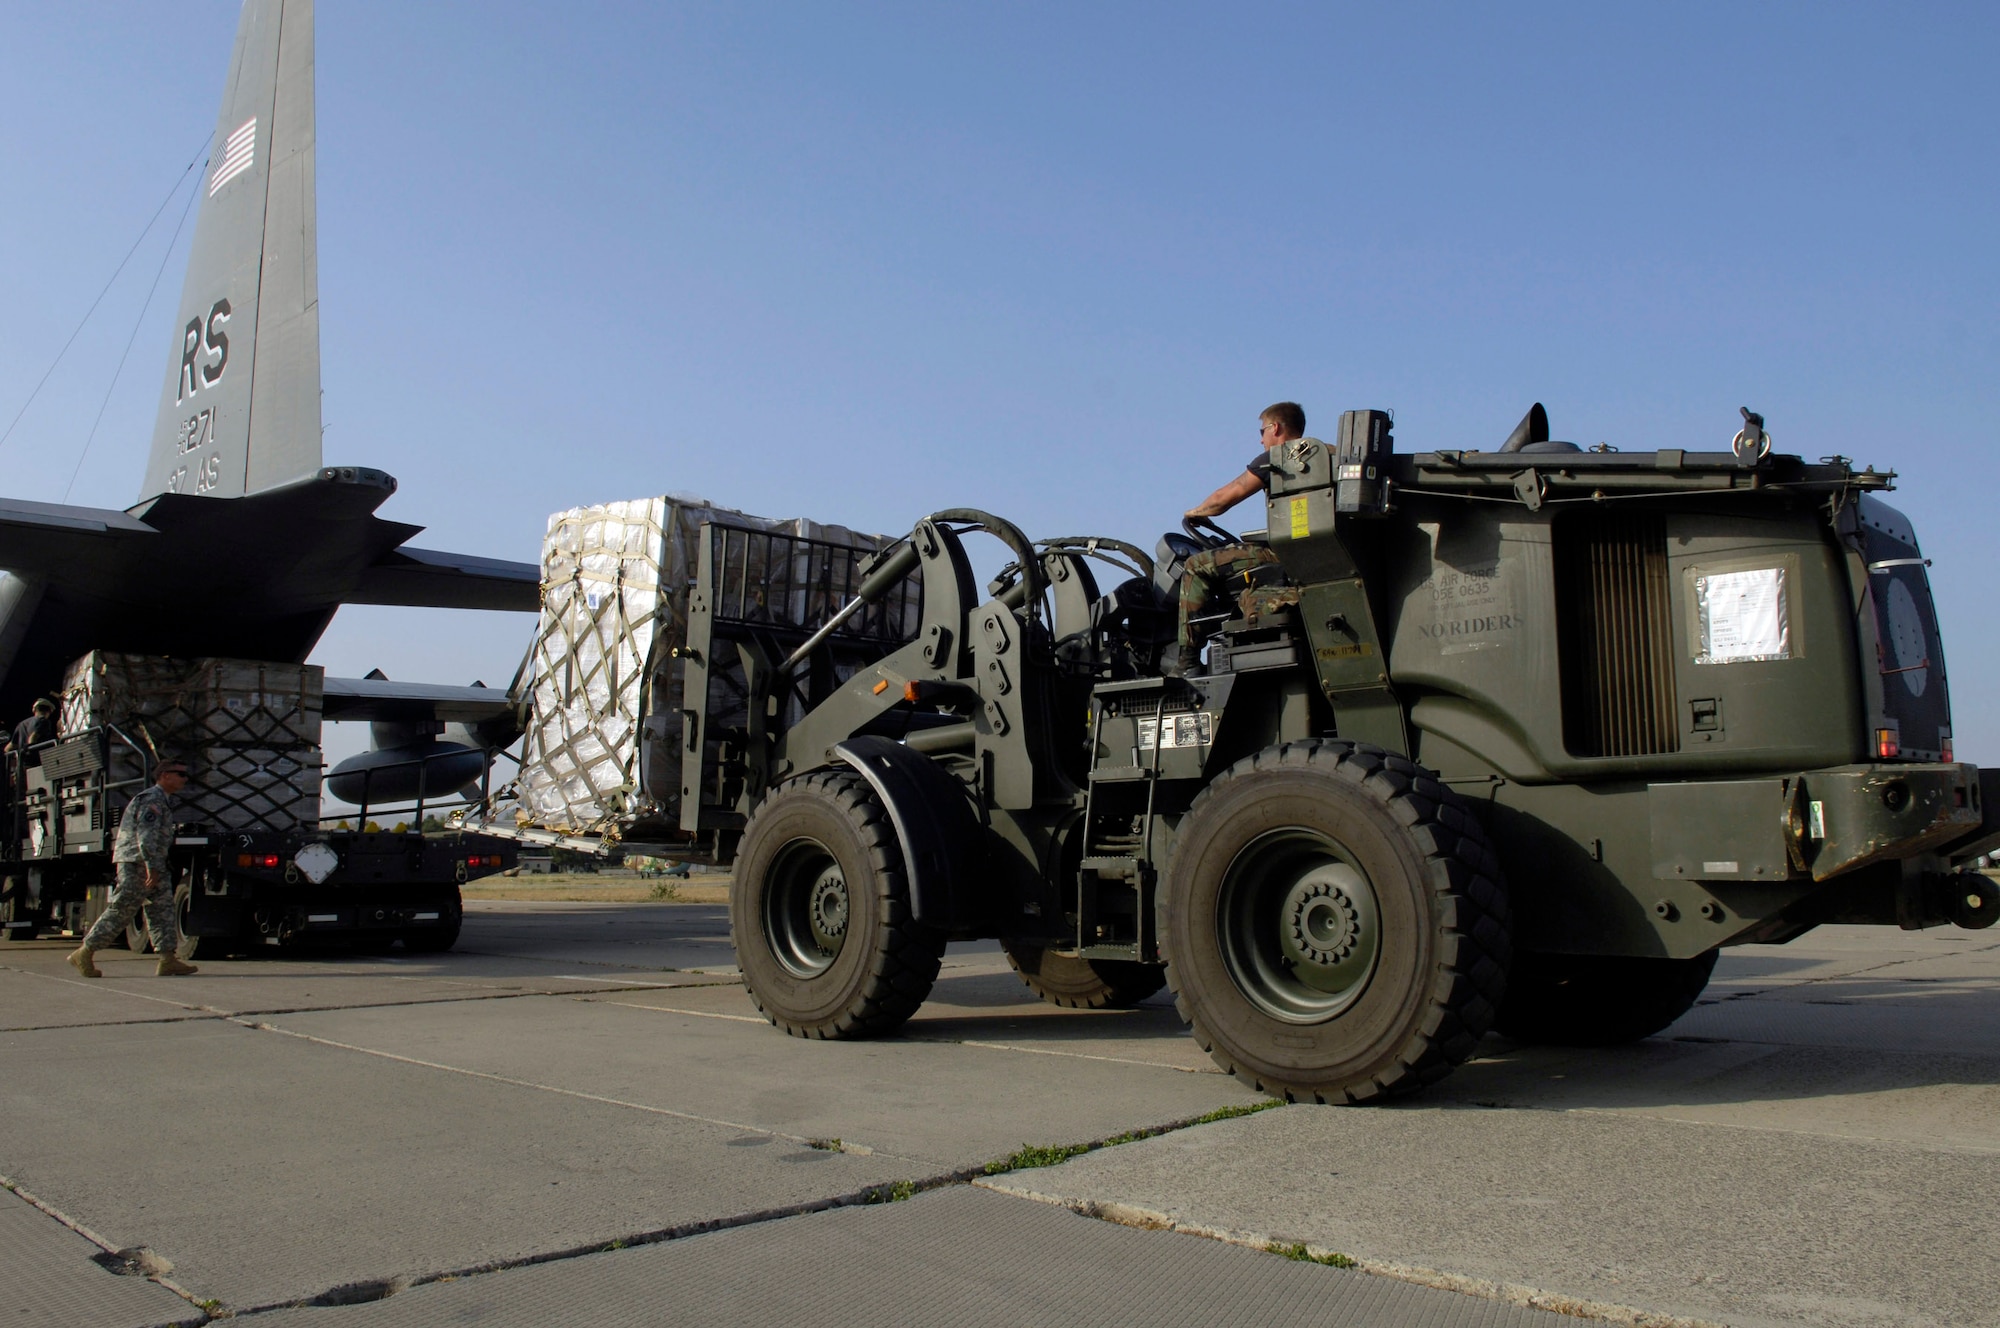 Airmen assigned to the 720th Air Expeditionary Squadron unload pallets of Meals, Ready to Eat, sleeping bags and cots Aug. 23 on a flightline in Tbilisi, Georgia. The joint humanitarian assistance assessment team with U.S. European Command is working with the federal government, international governments, aid agencies and the Republic of Georgia to assist Georgians affected by the recent conflicts. (U.S. Air Force photo/Staff Sgt. Ricky A. Bloom)